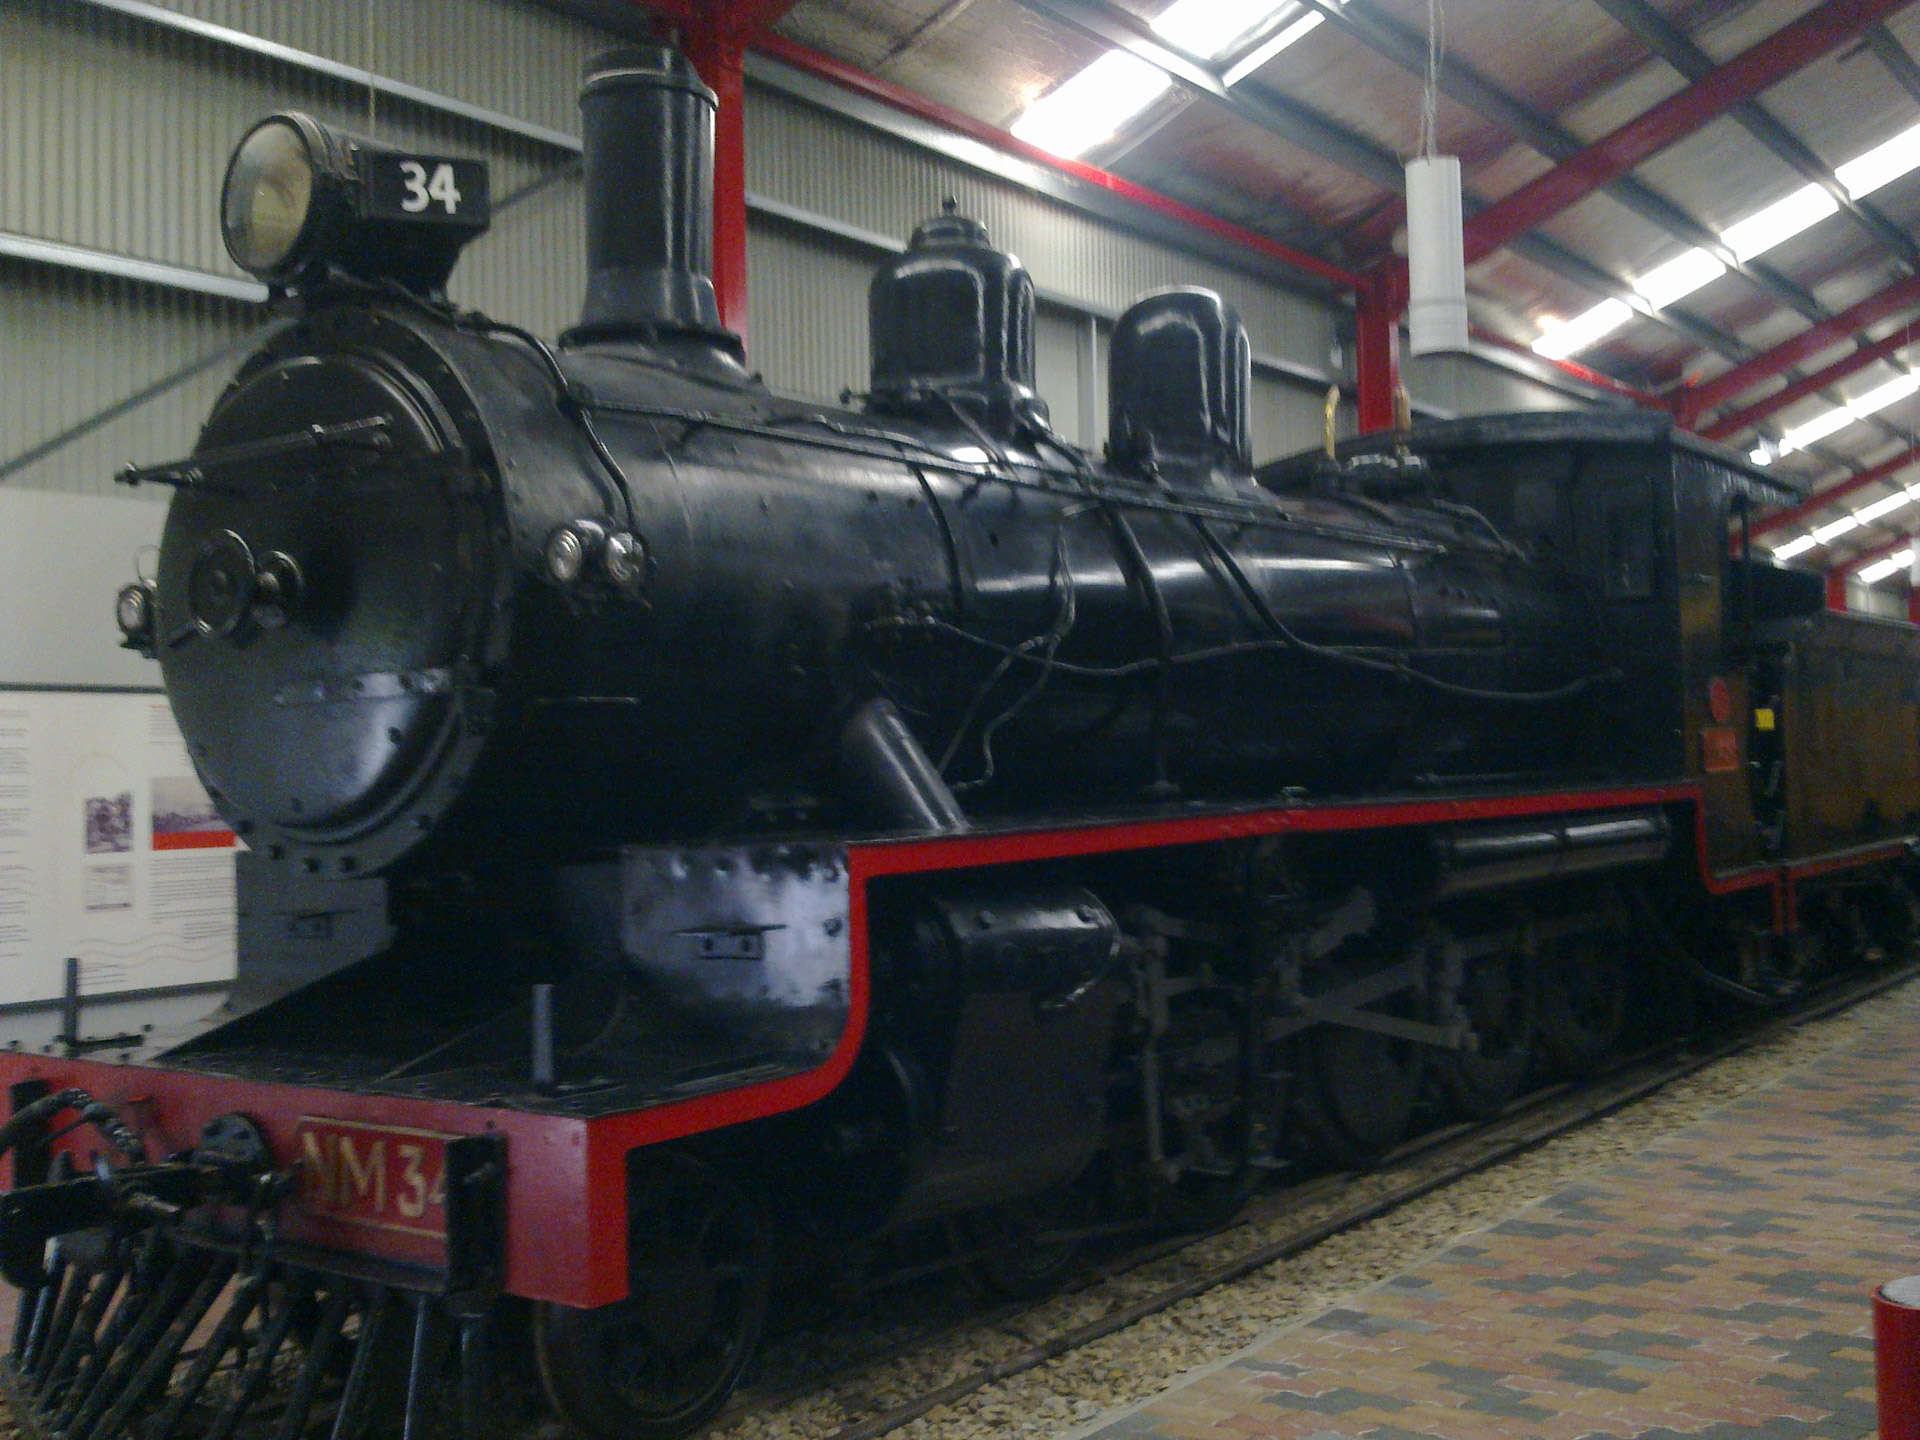 This train is in the South Australian Railway museum